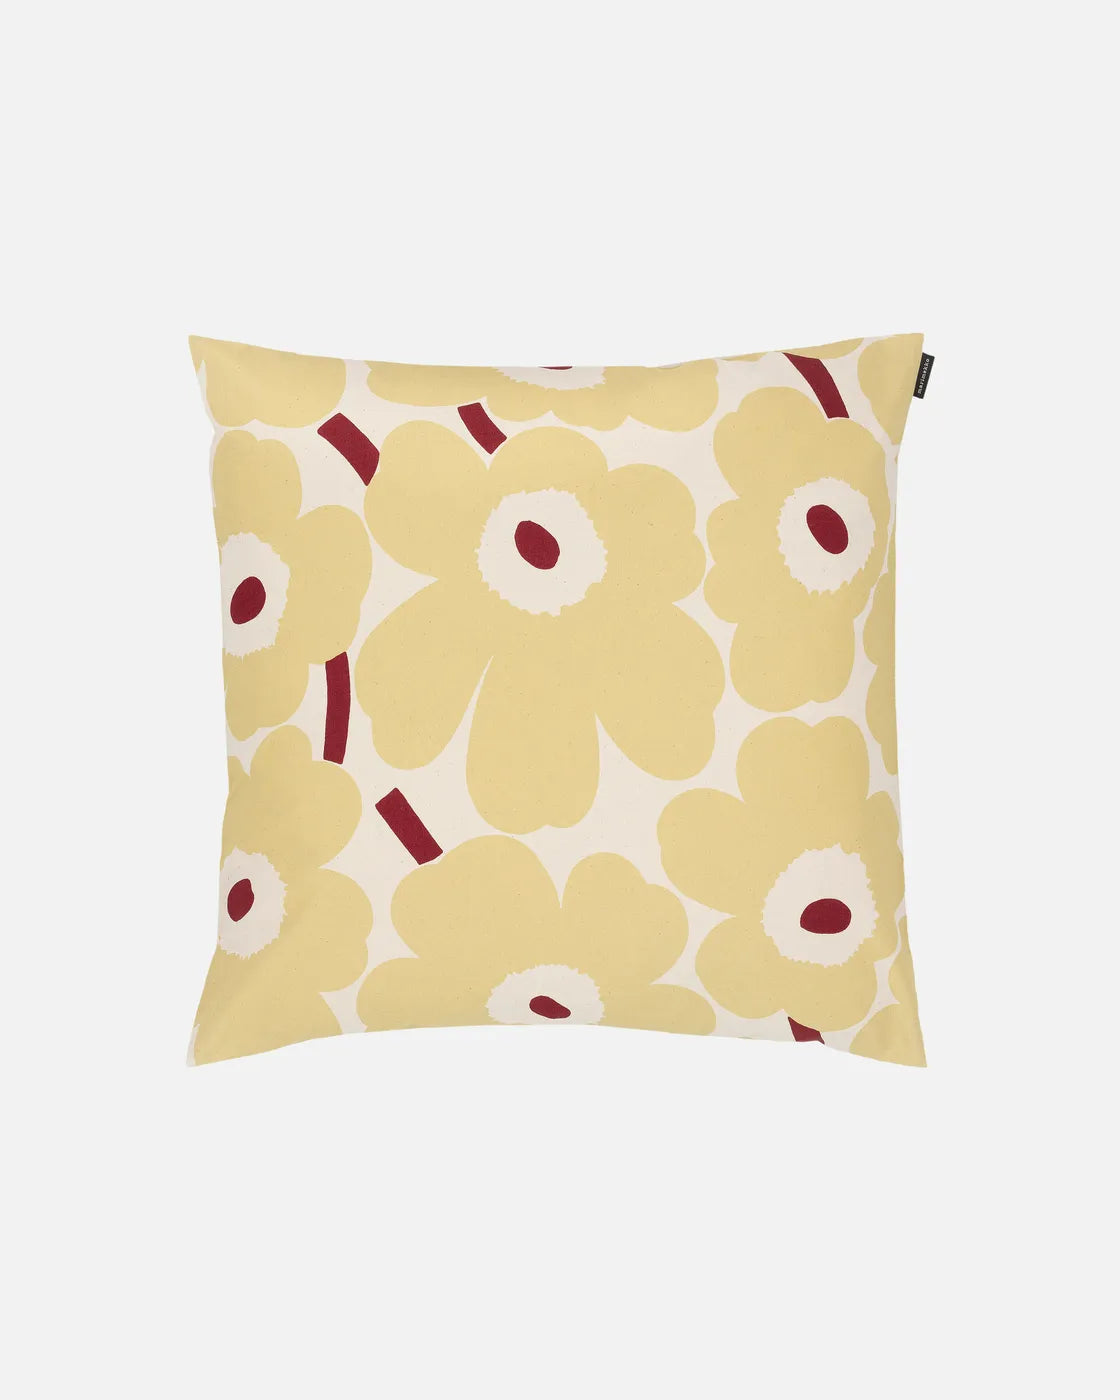 Pieni Unikko Cushion Cover (butter yellow, red)